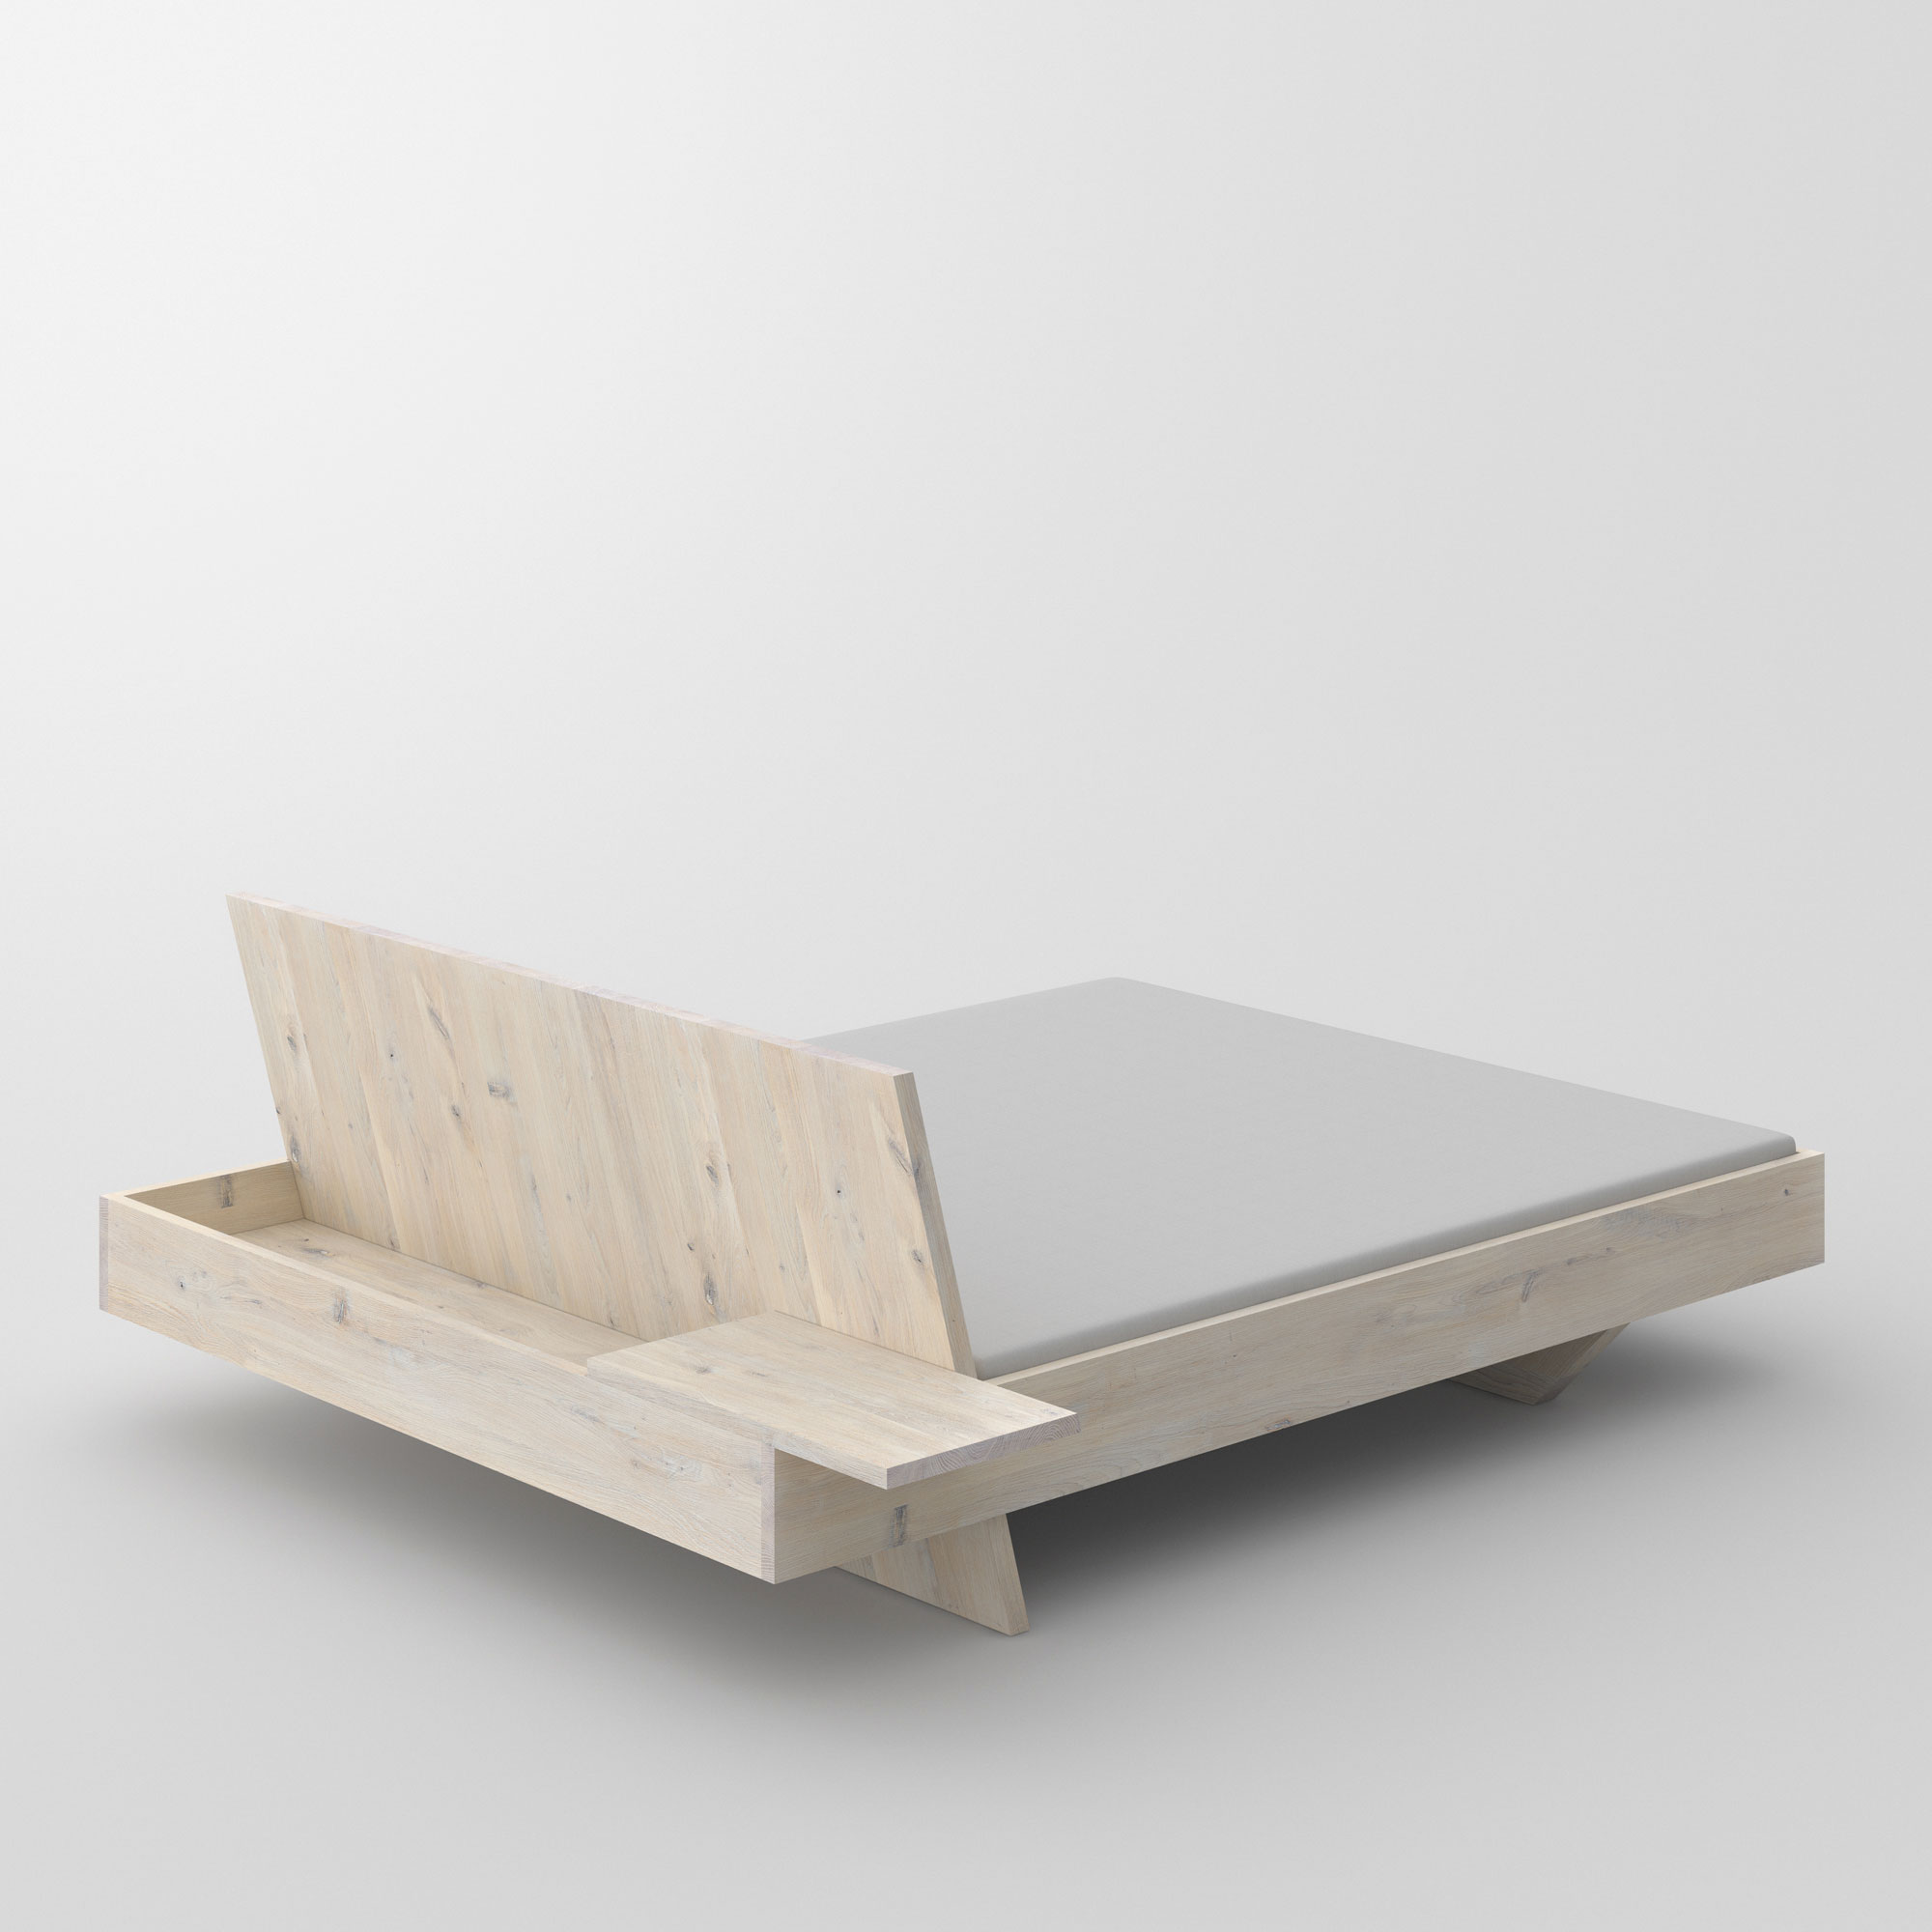 Design Solid Wood Bed SOMNIA cam3 custom made in solid wood by vitamin design